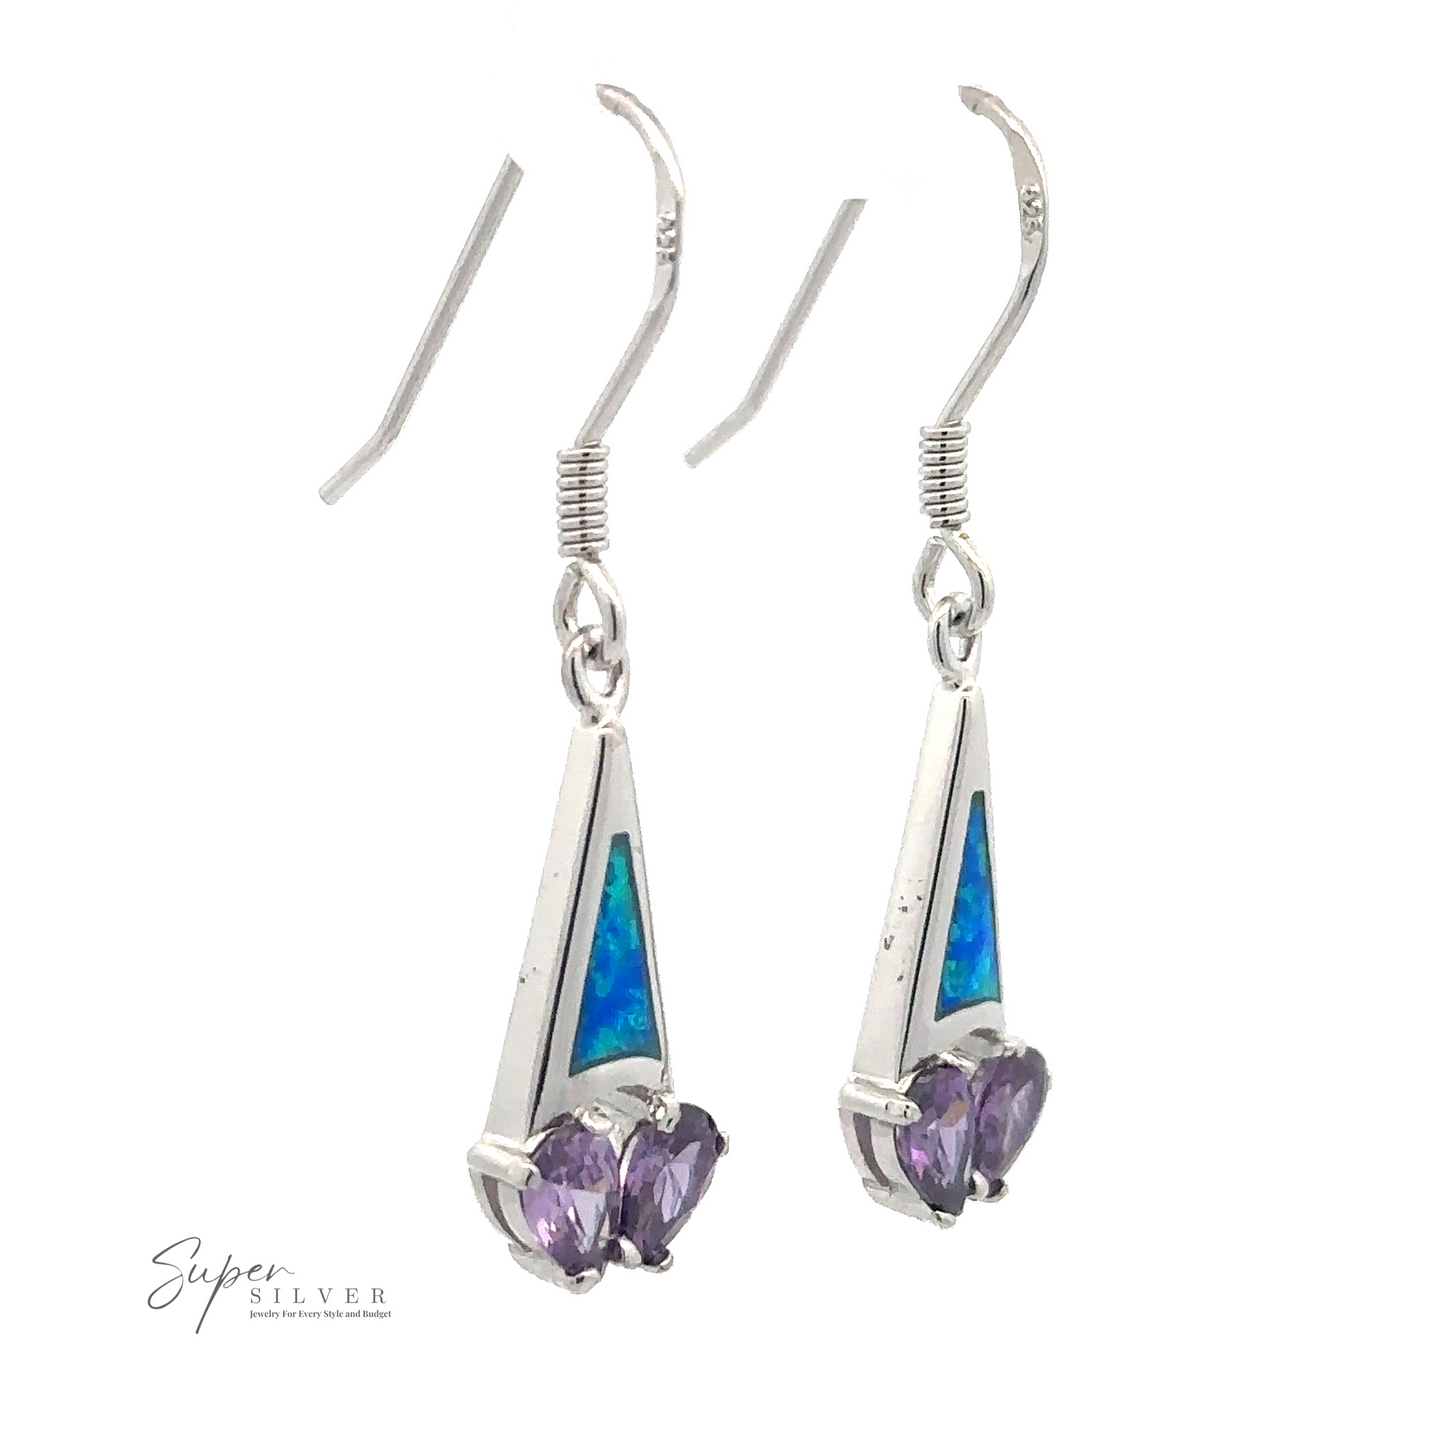 A pair of rhodium-plated sterling silver drop earrings with purple heart-shaped CZ stones and blue triangular inlays. The hooks have a simple design, and "Created Opal Earrings with Purple Cubic Zirconia" is branded at the bottom left corner.